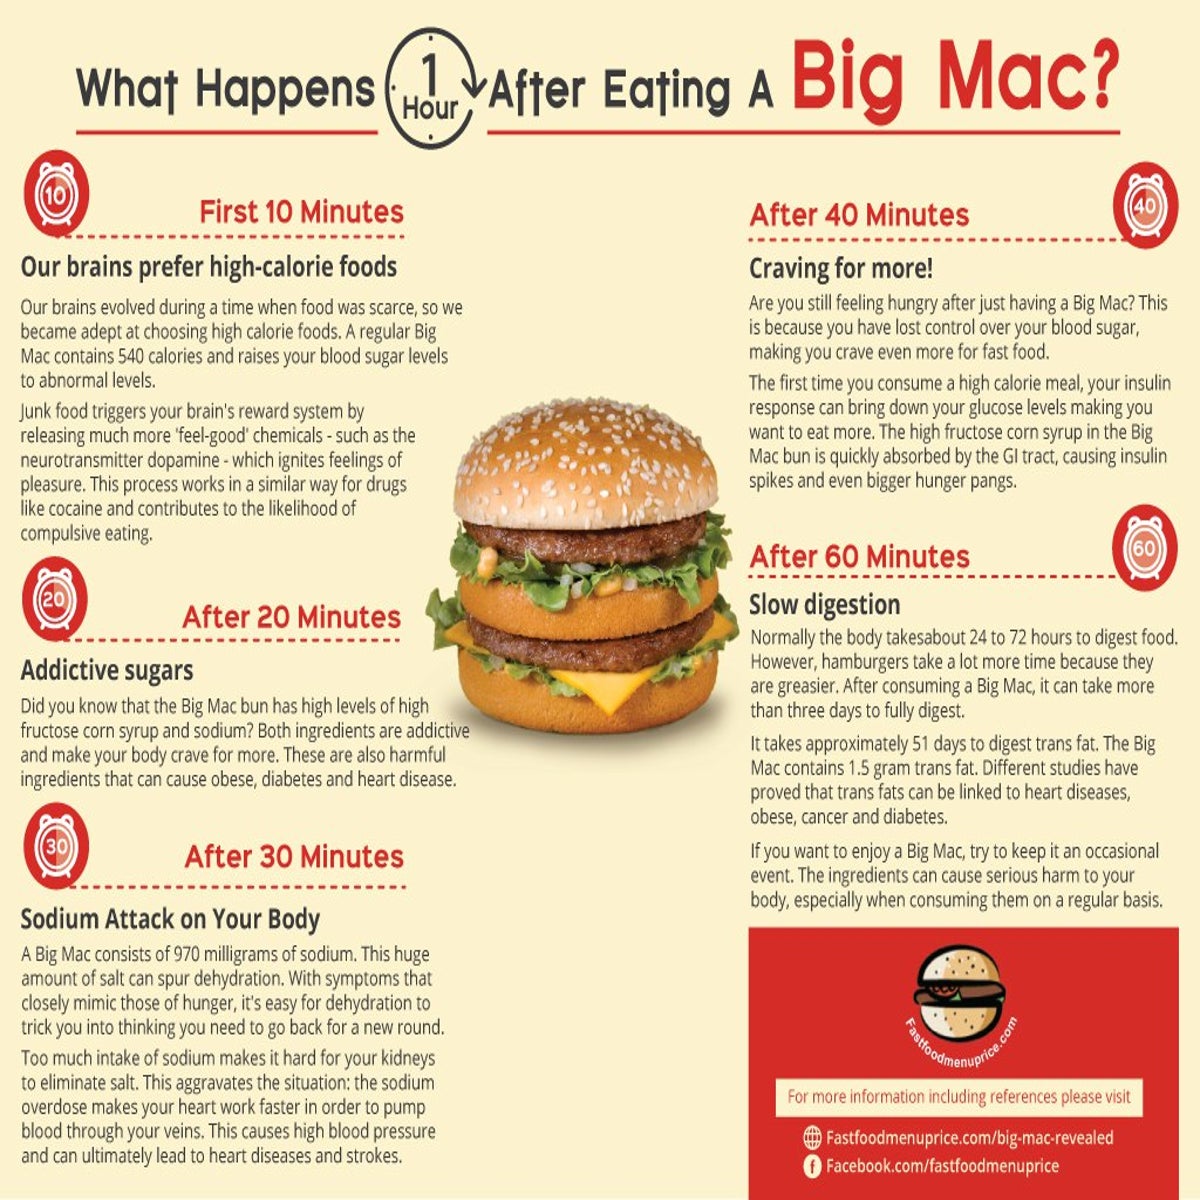 What really happens to your body an hour after eating a Big Mac? Expert  debunks claims, The Independent